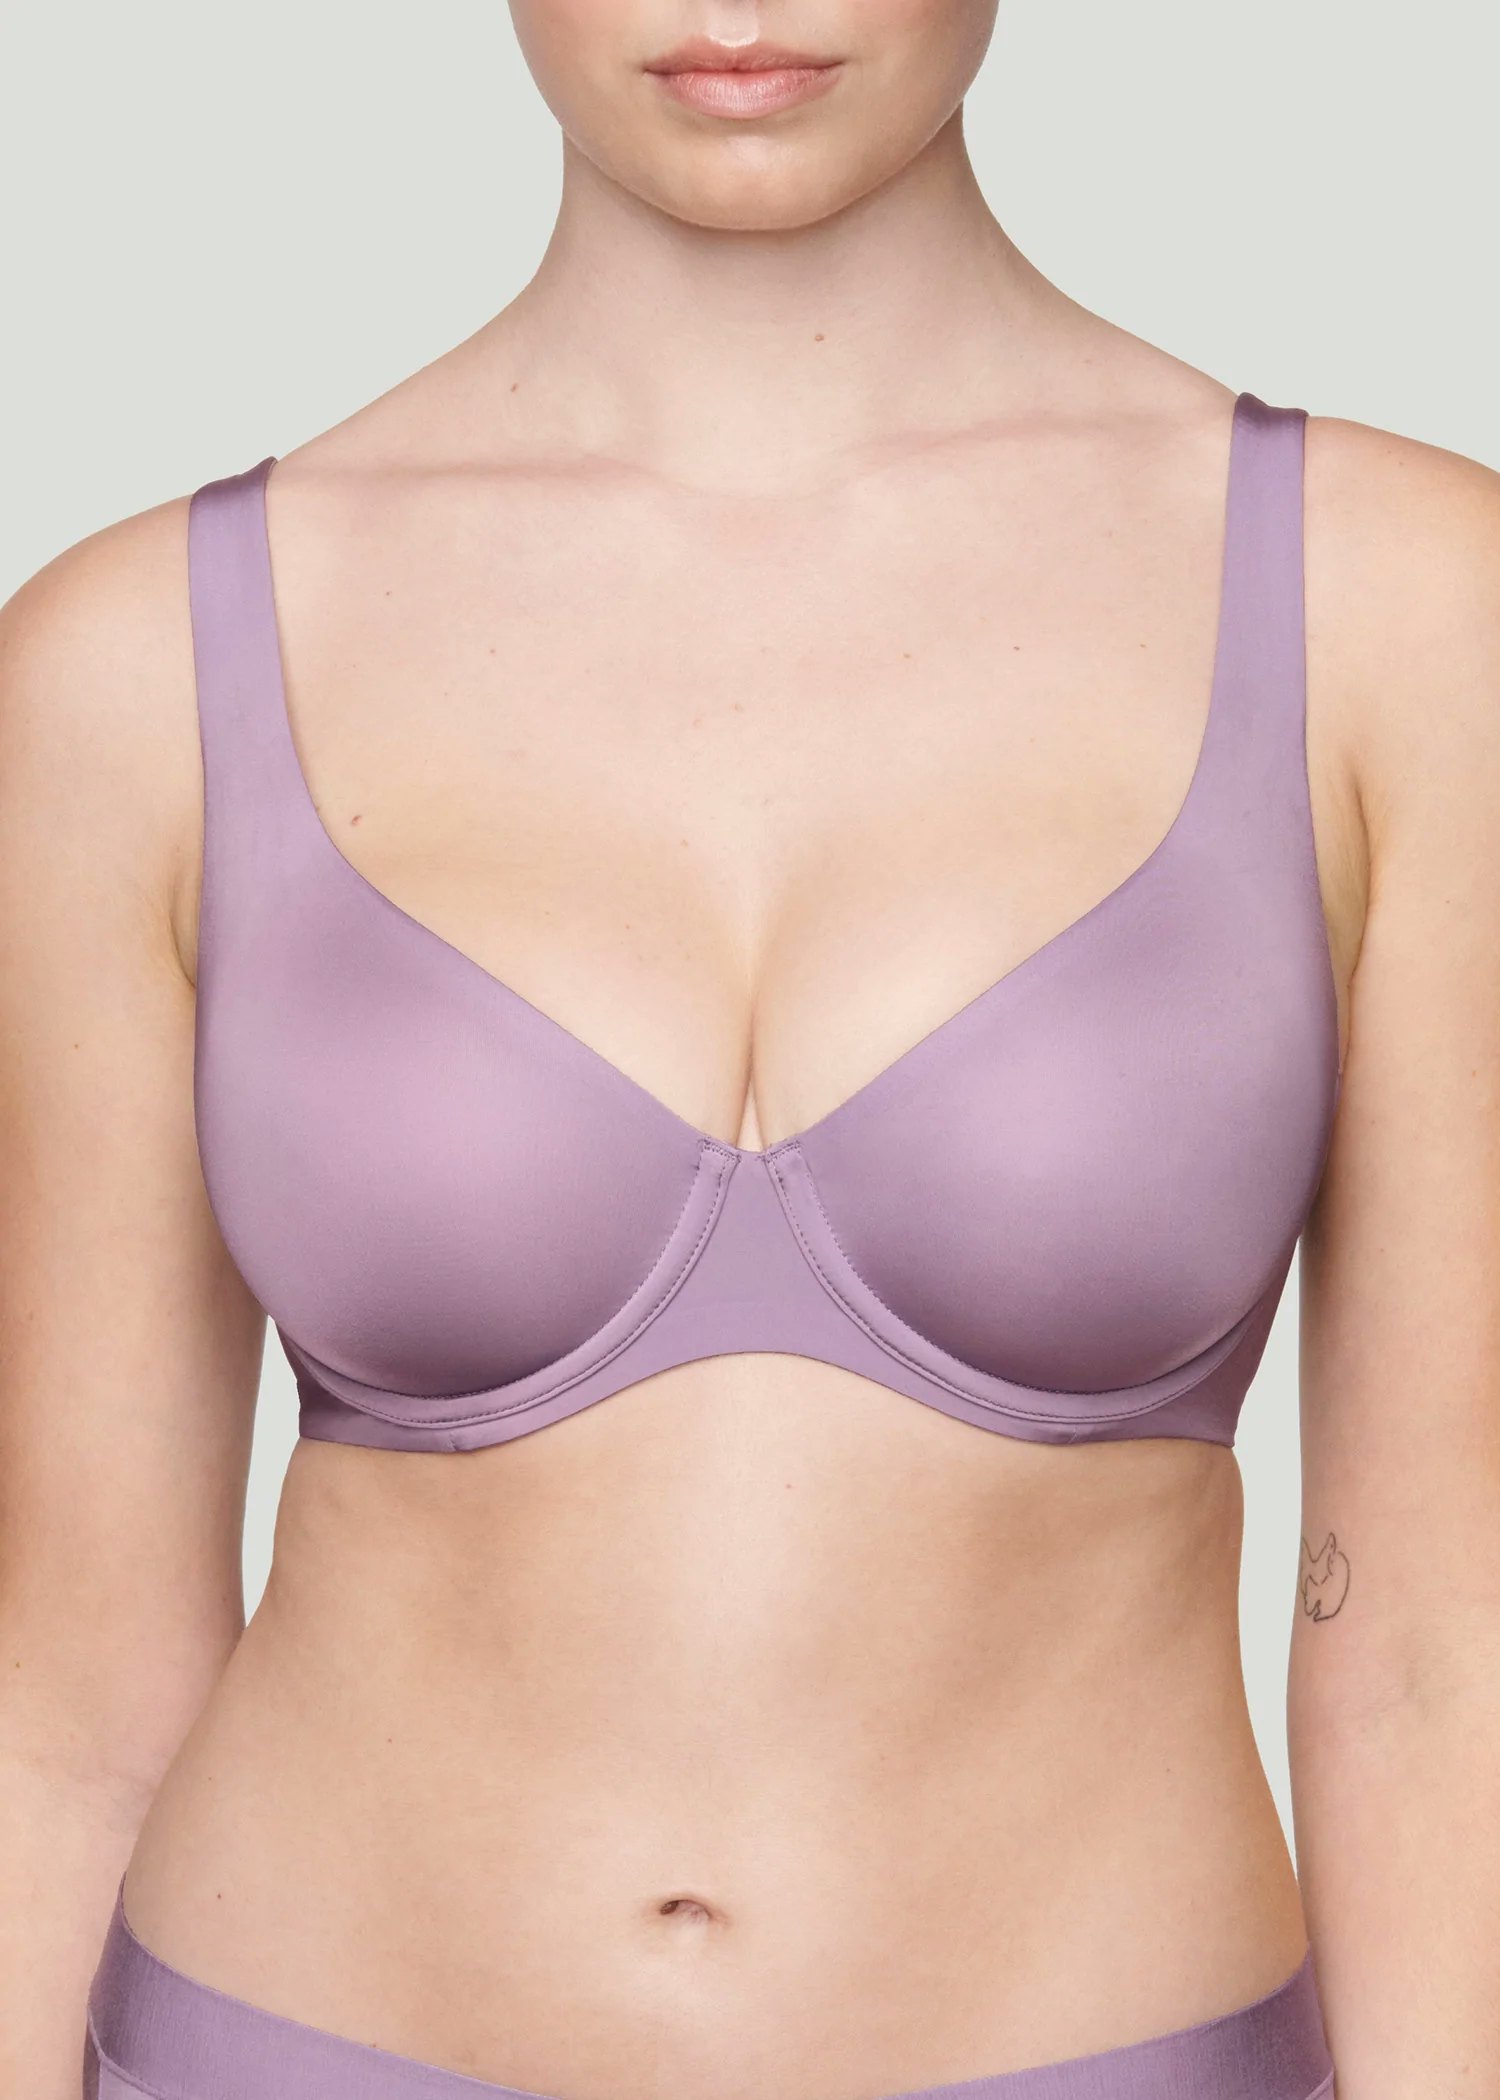 25 Bra Types To Know About, No Matter What Boob Shape You Have